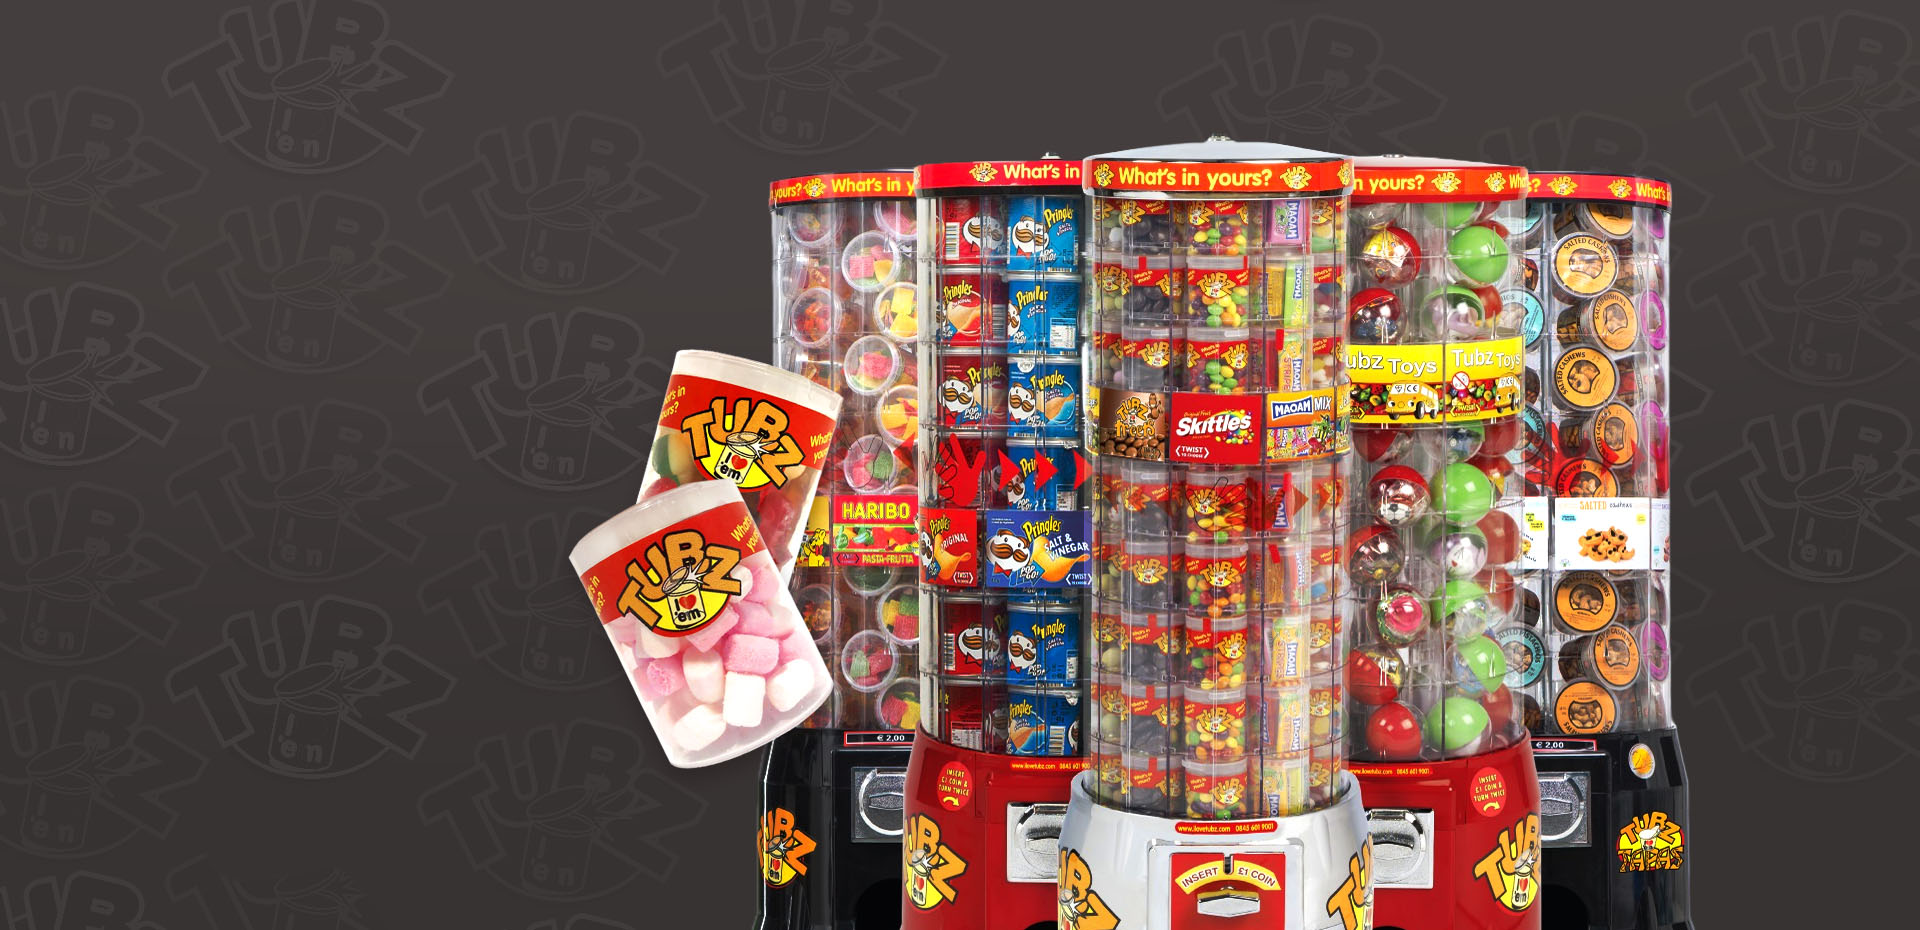 Installers Of Sweets Vending Machines For Pubs Market Harbrough